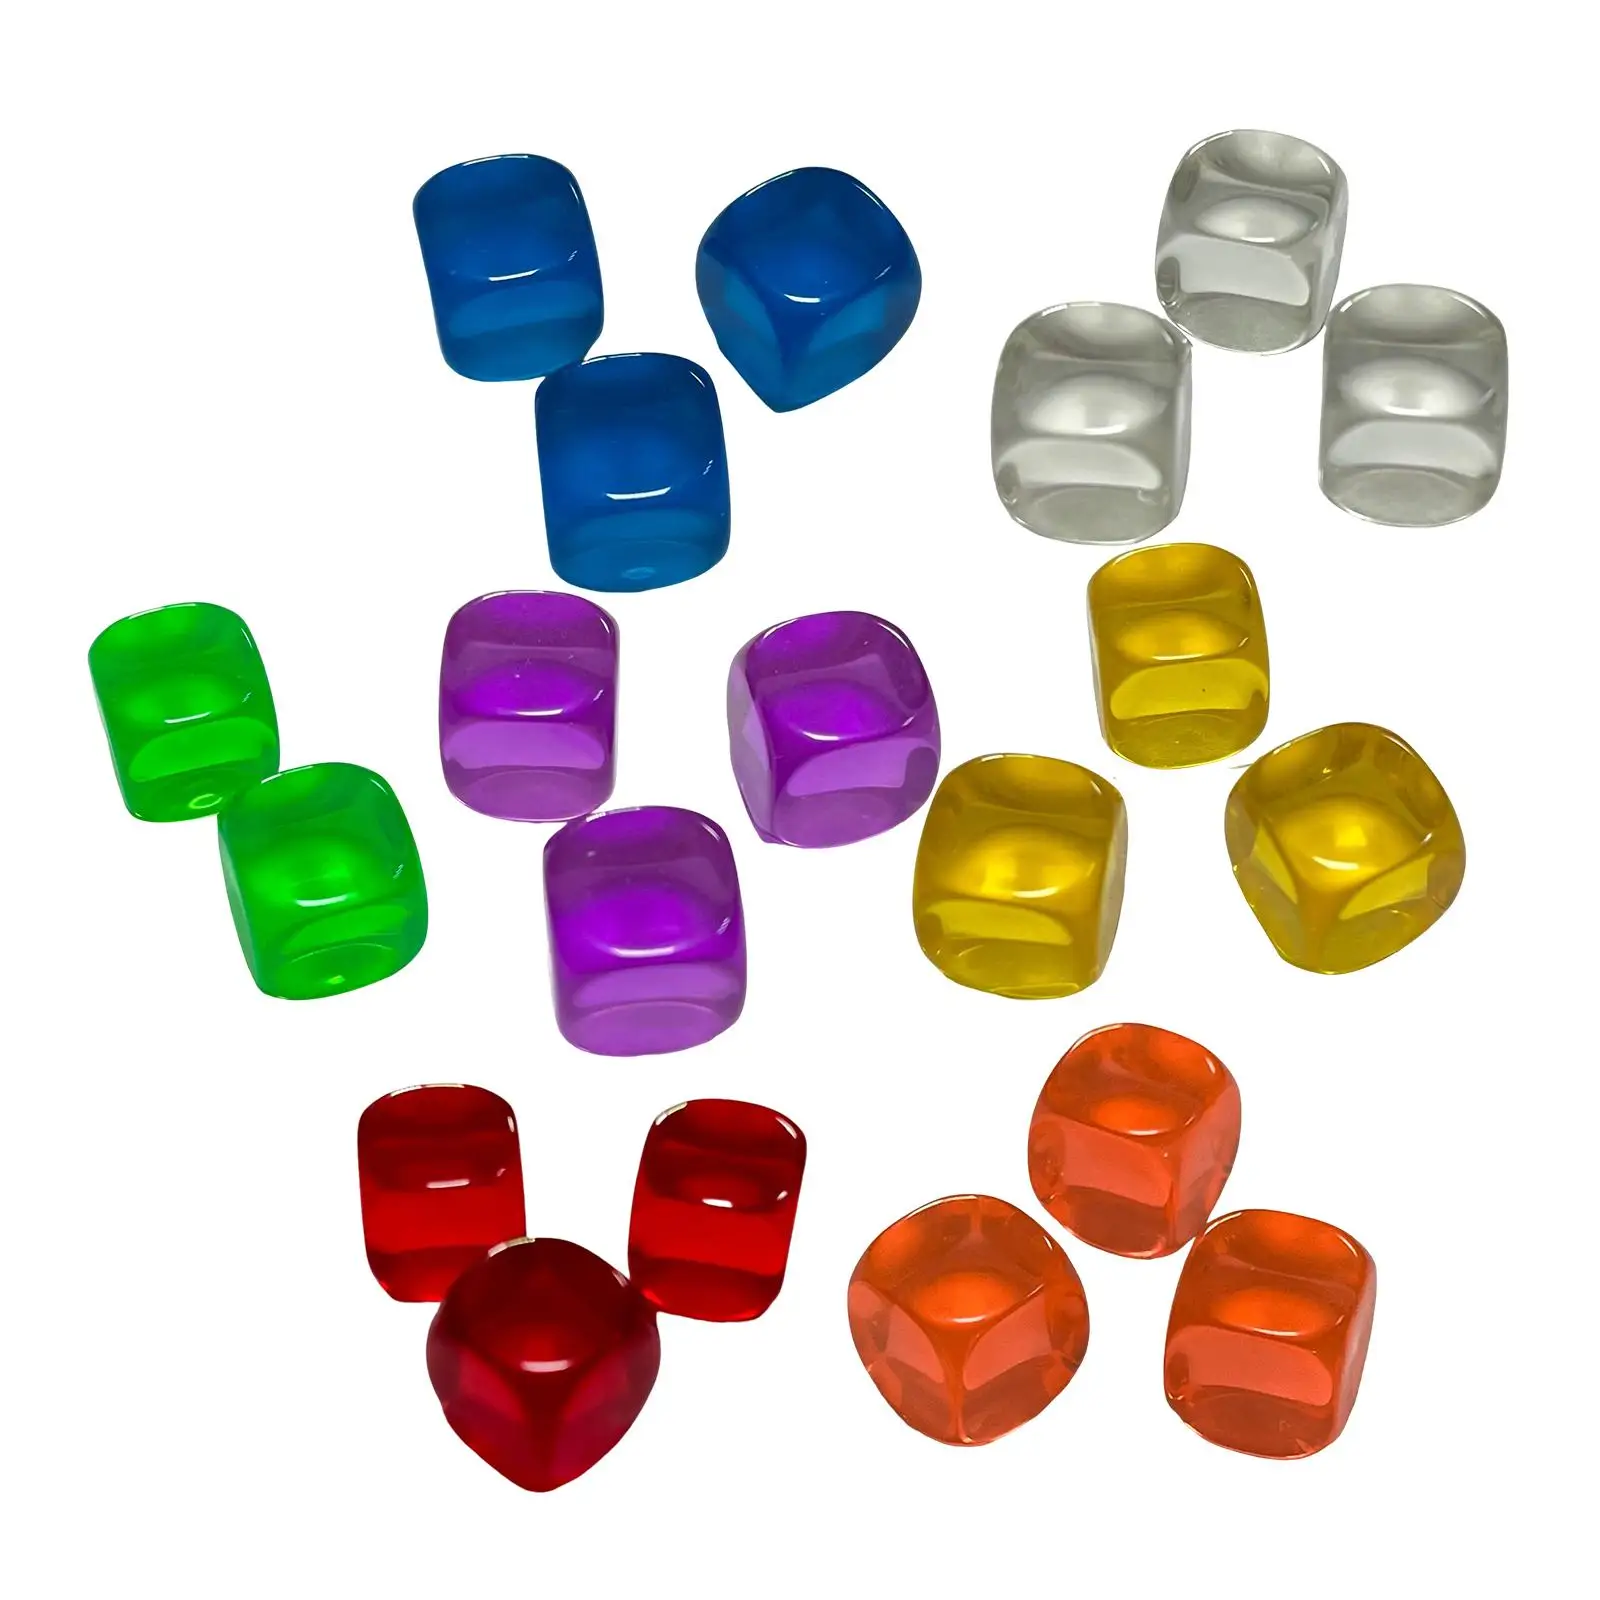 20 Pieces 16mm Blank Dices Education Markers Activity Standard for Board Game Props Crafts Desktop Game Entertainment Toys